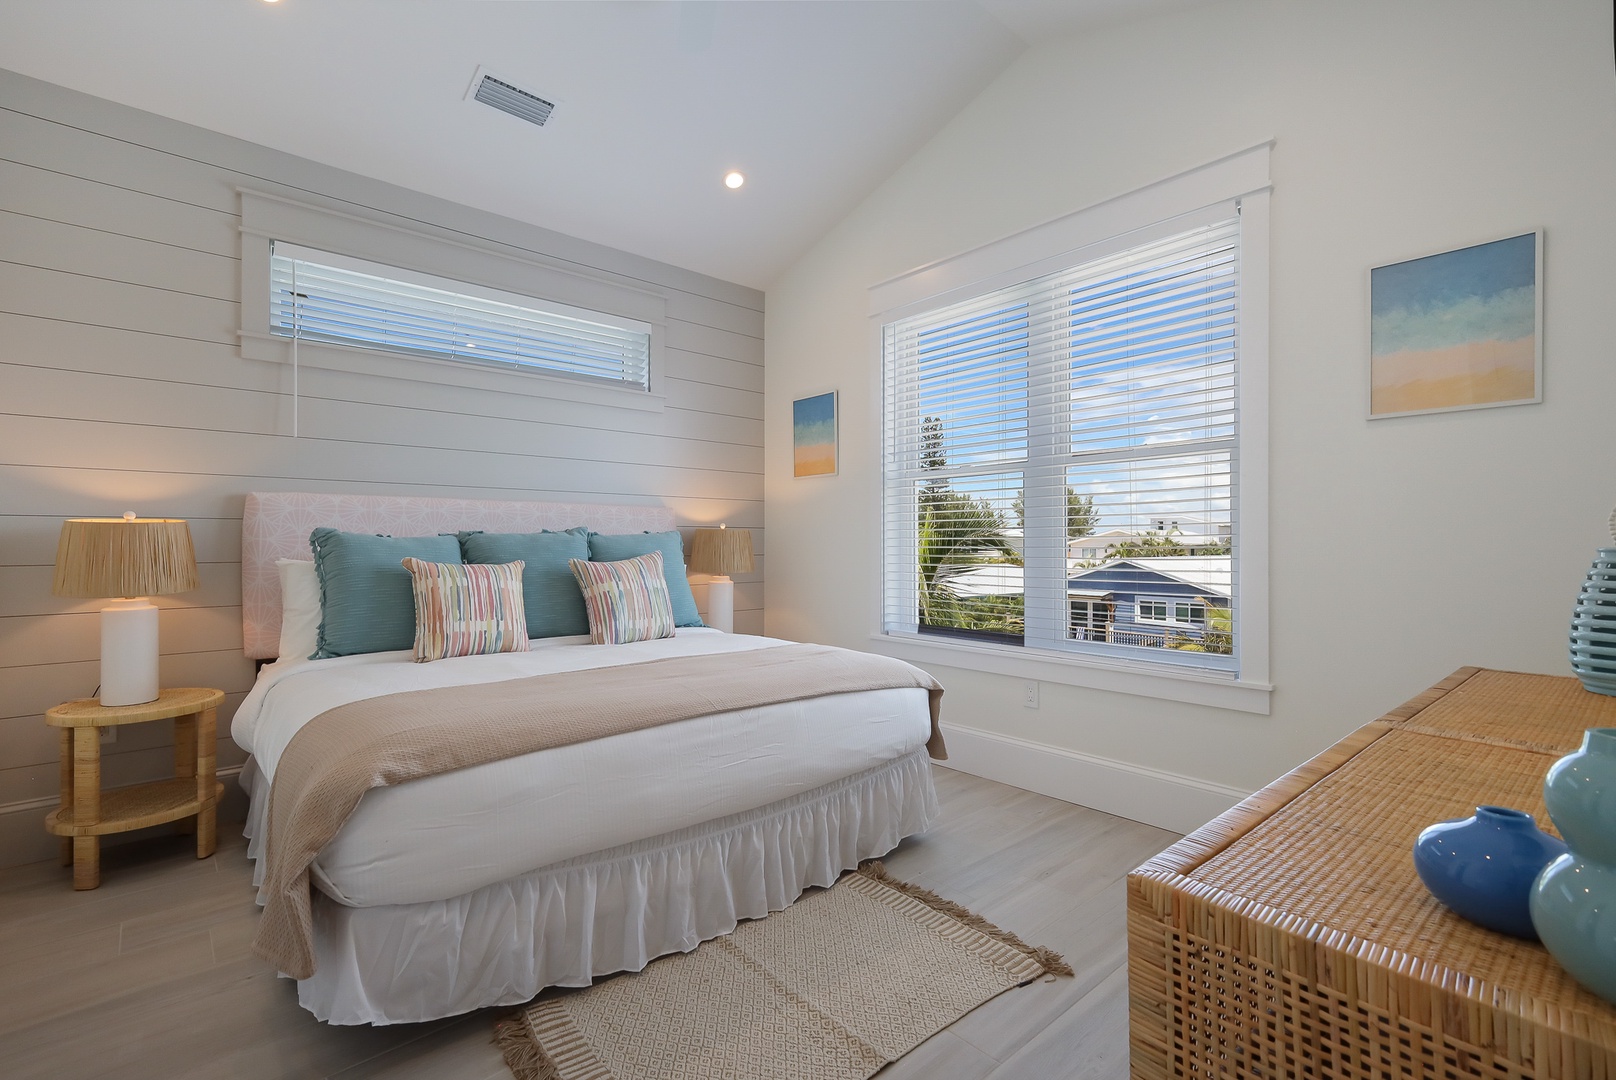 What A Catch - By Anna Maria Island Accommodations (40)